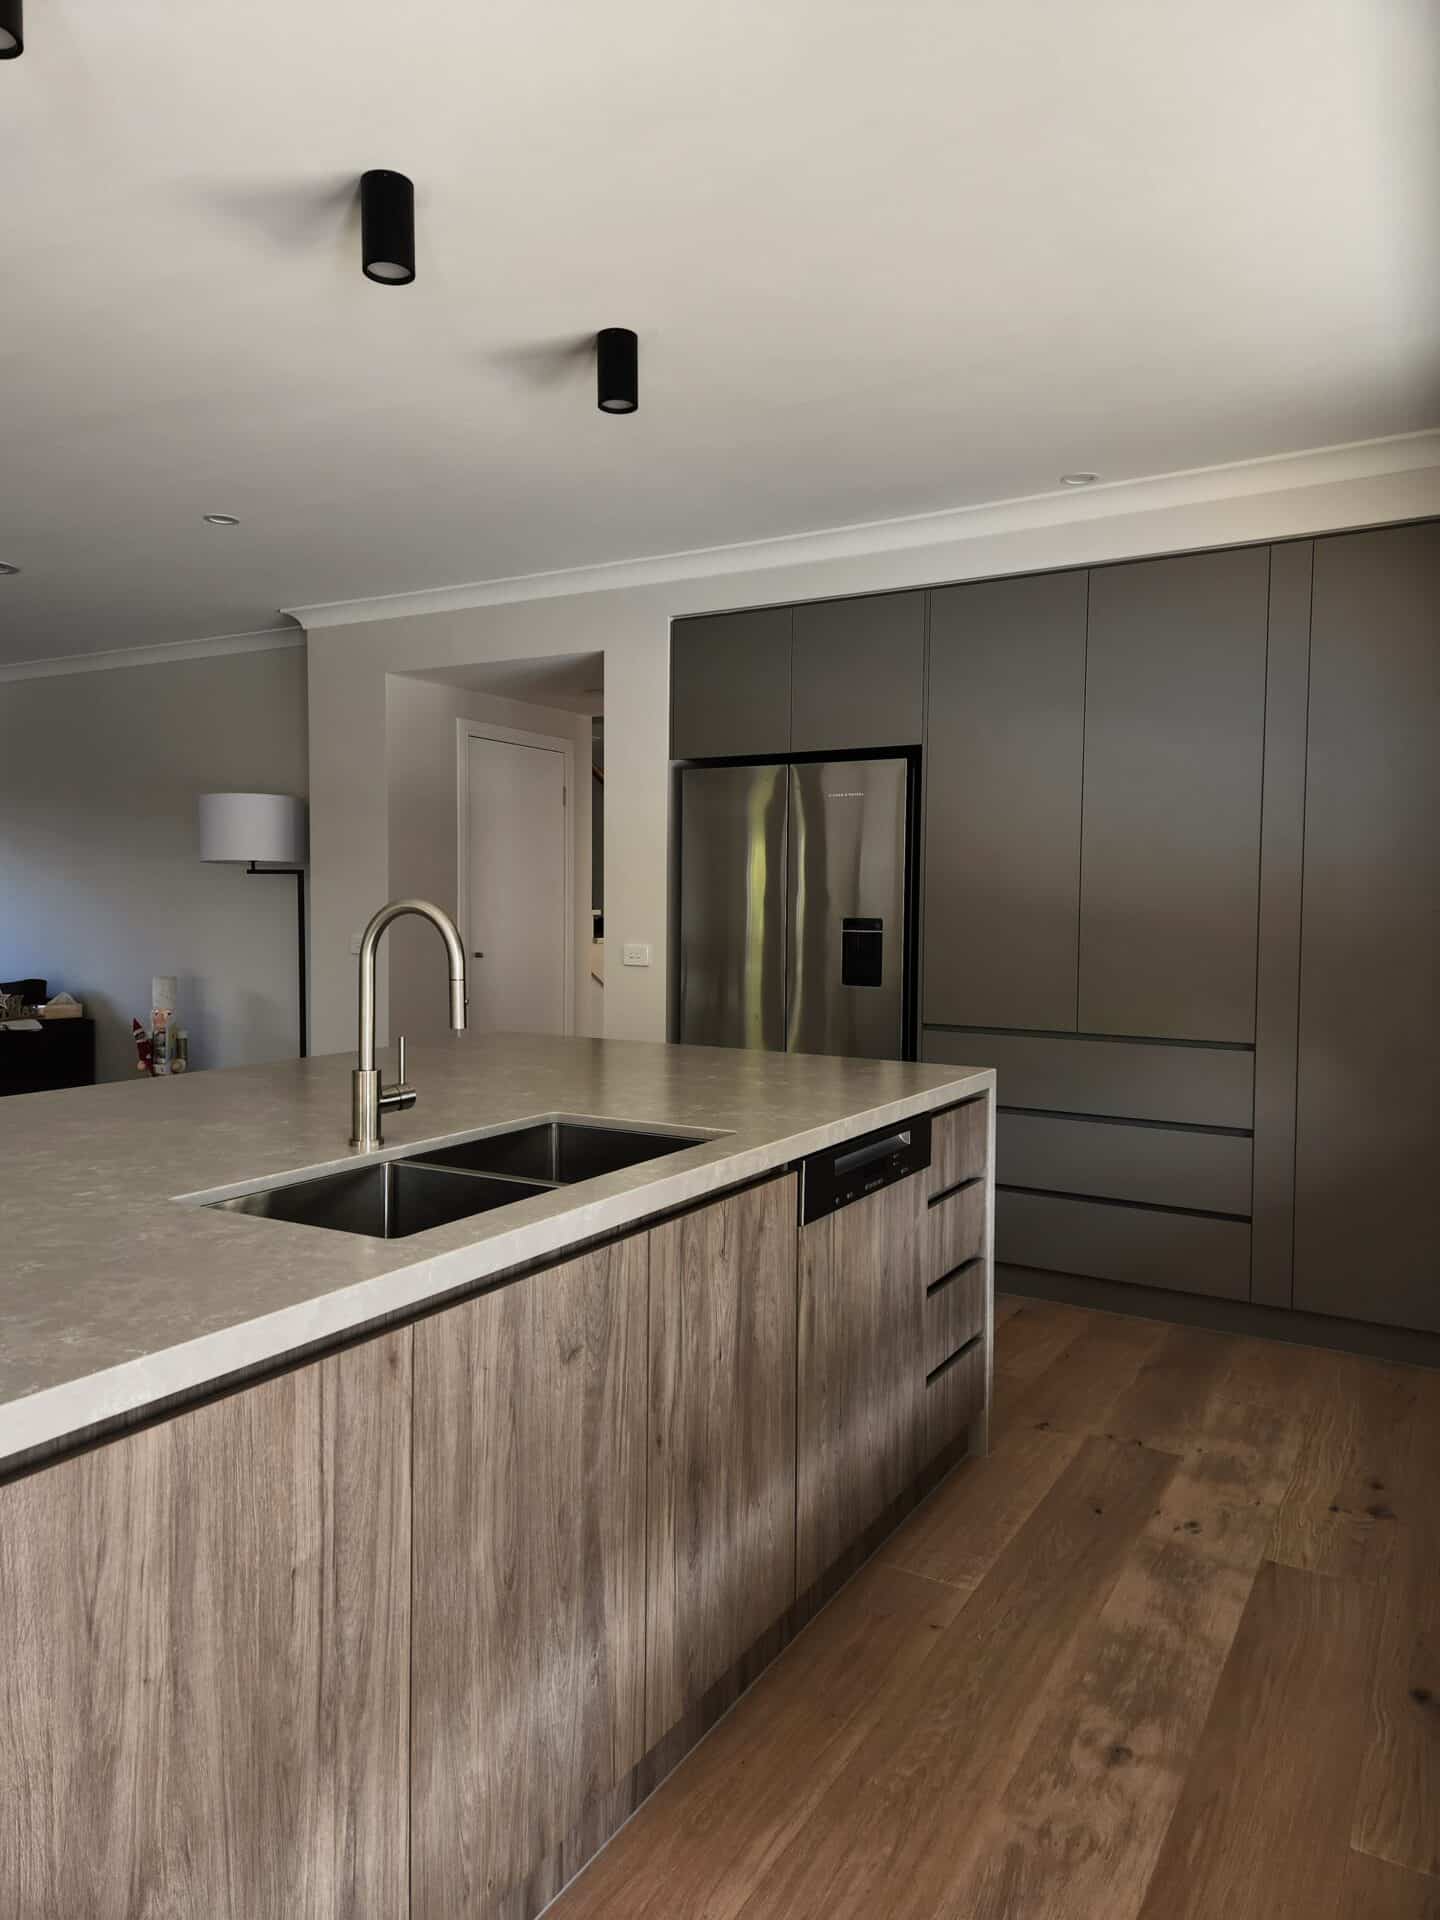 A kitchen renovation project in Observations Court, Waterways